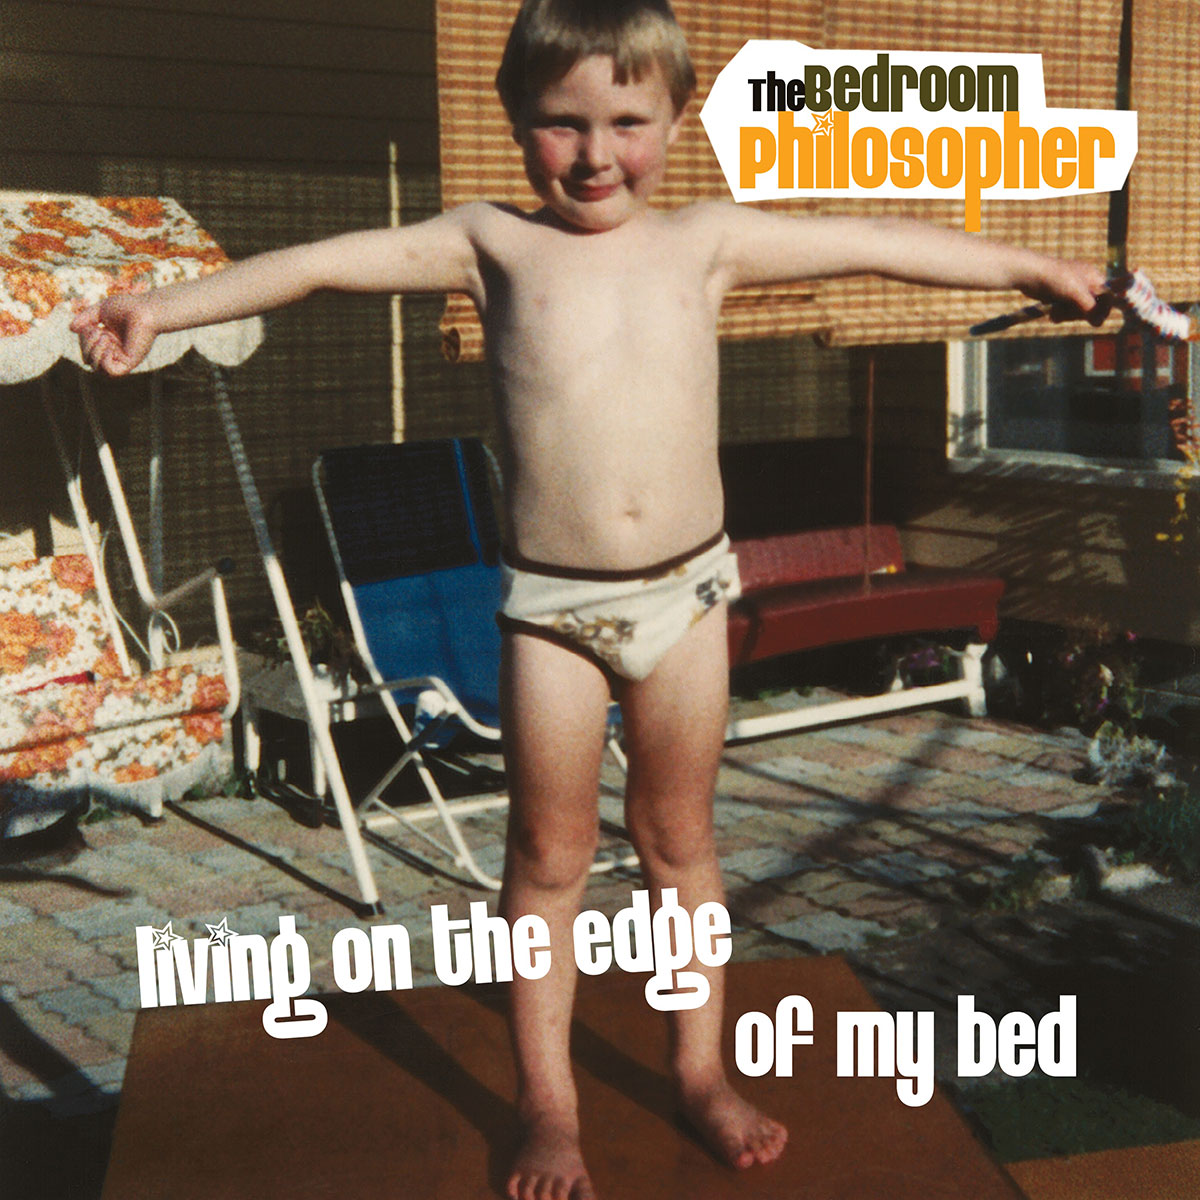 The Bedroom Philosopher - Living on the edge of my bed